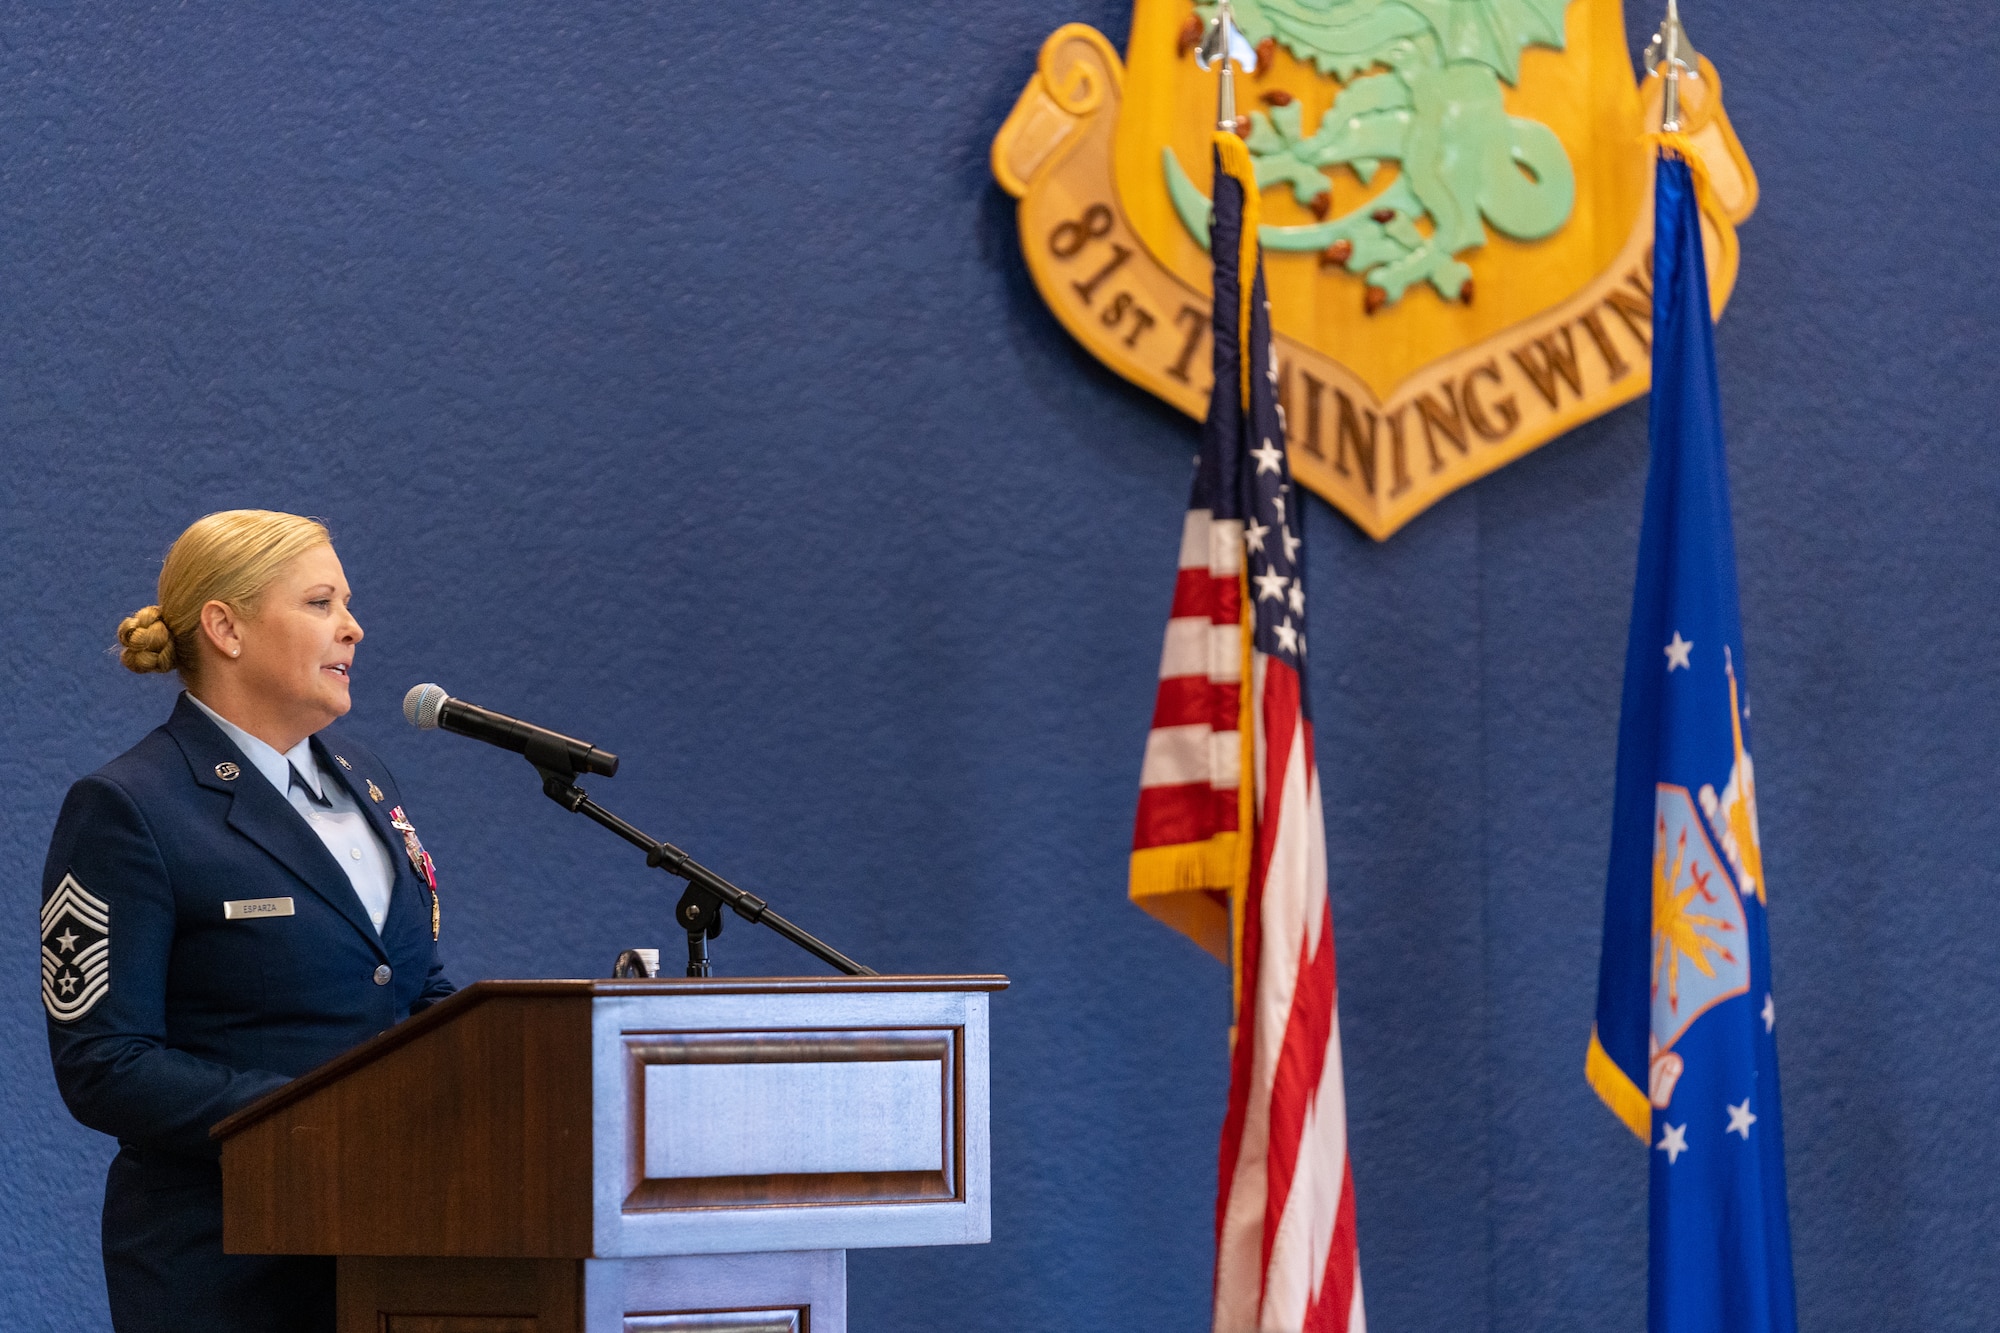 U.S. Air Force Chief Master Sgt. Sarah Esparza, 81st Training Wing command chief master sergeant, delivers remarks during her retirement ceremony at Keesler Air Force Base, Mississippi, June 1, 2023.